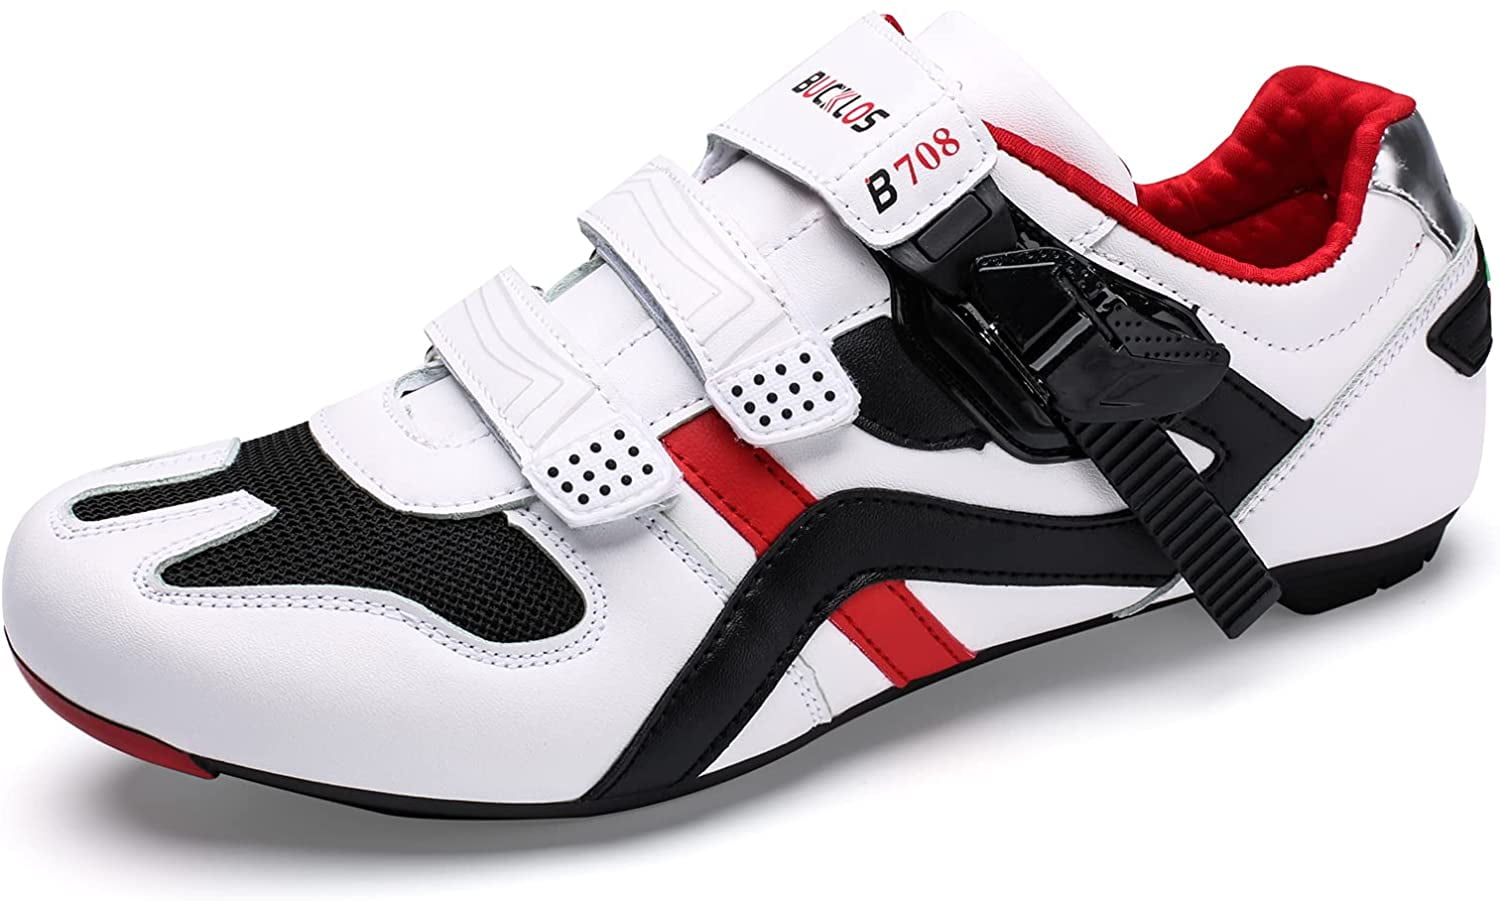 Details about   Road Cycling Bicycle Shoes Men Outdoor Non-slip Professional Bike Shoes Trainers 